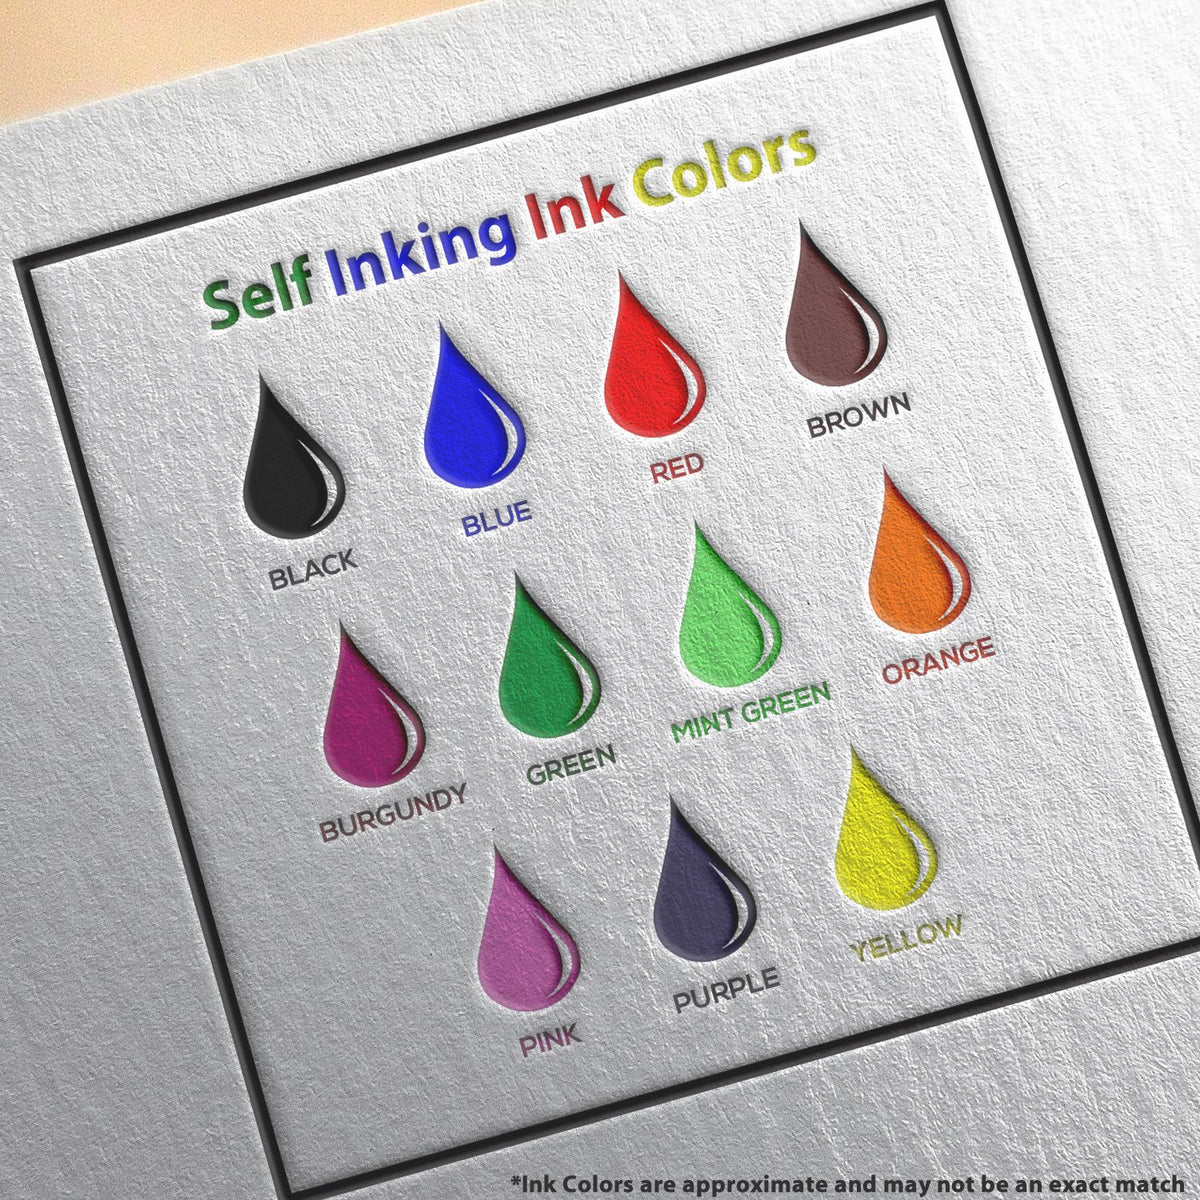 A picture showing the different ink colors or hues available for the Self-Inking New York PE Stamp product.